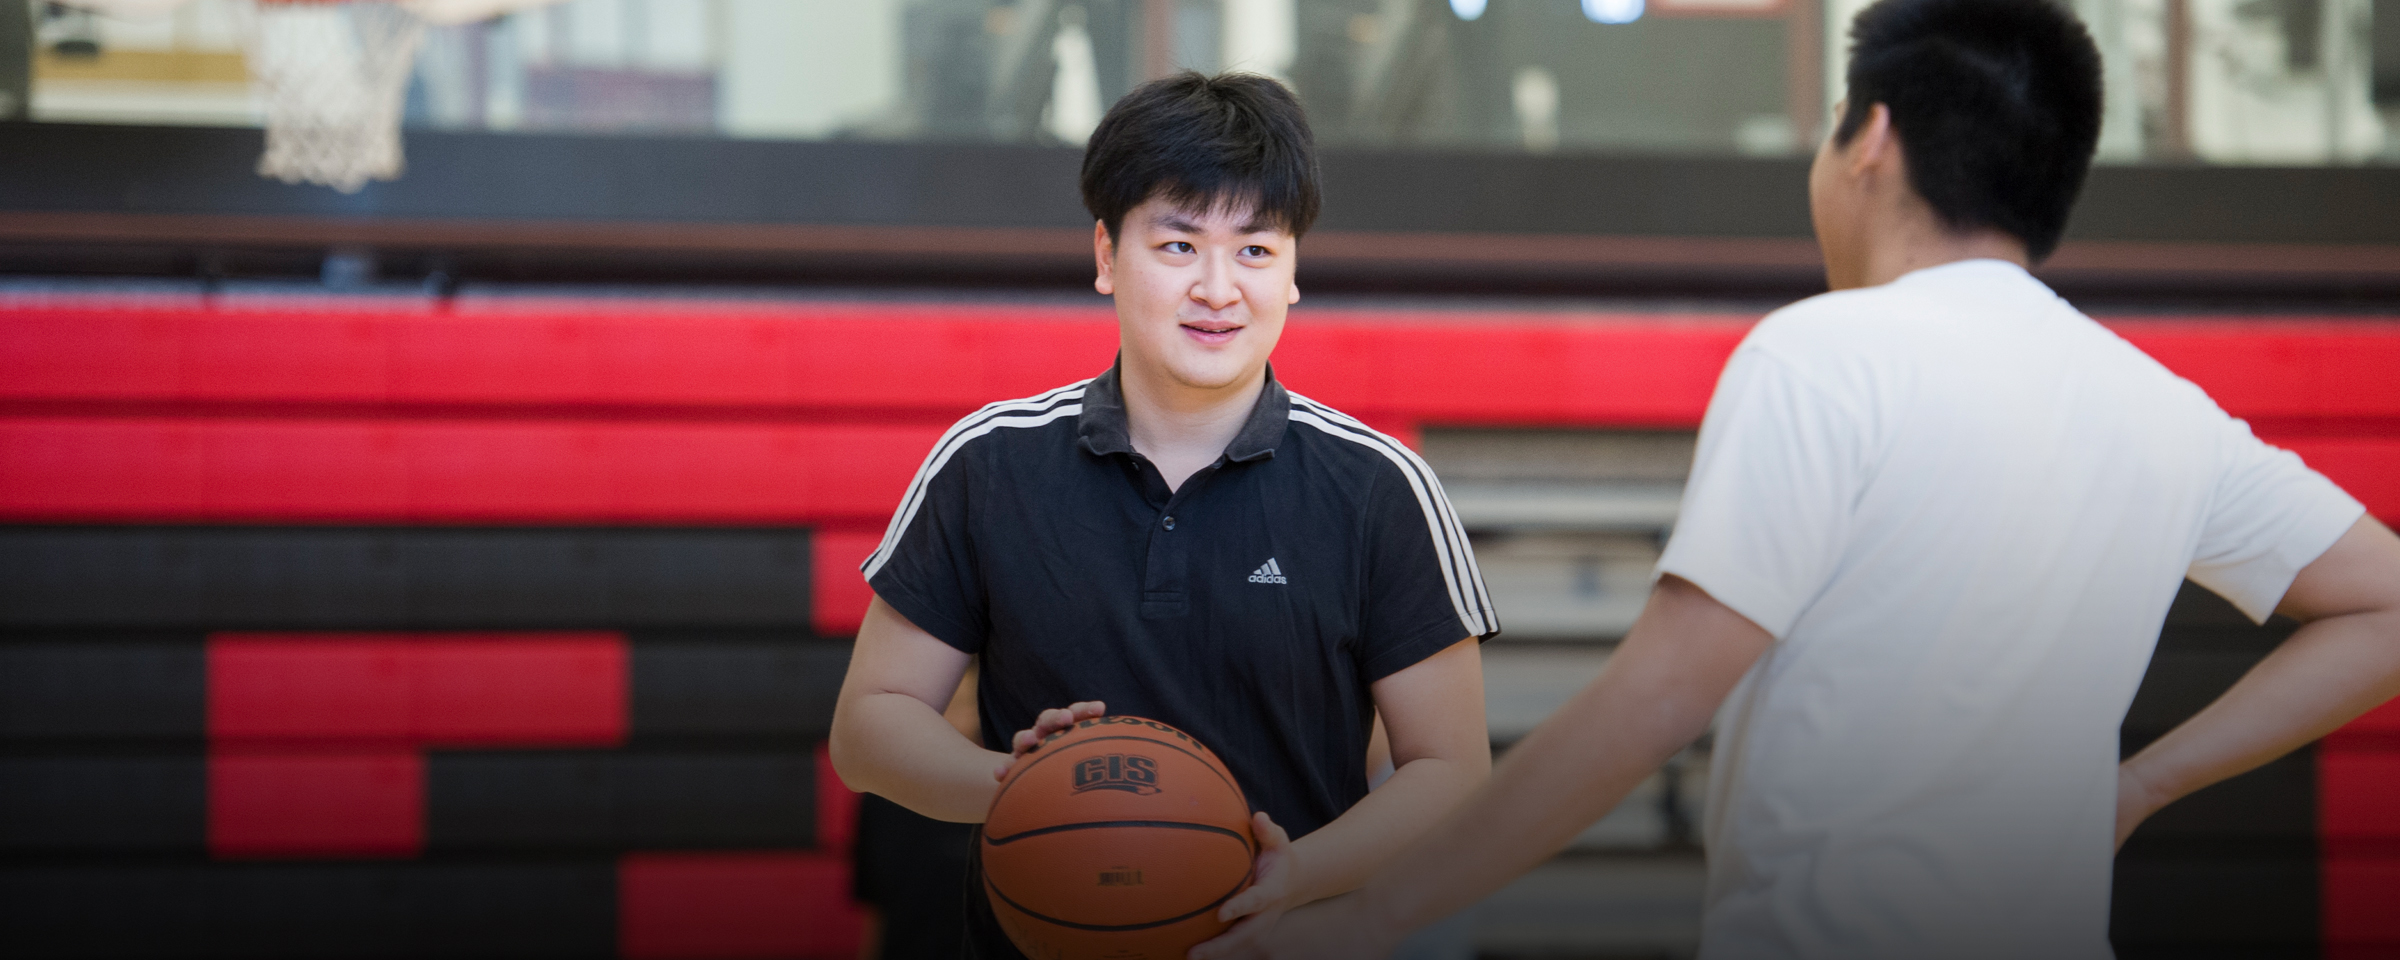 Two men playing basketball in gym